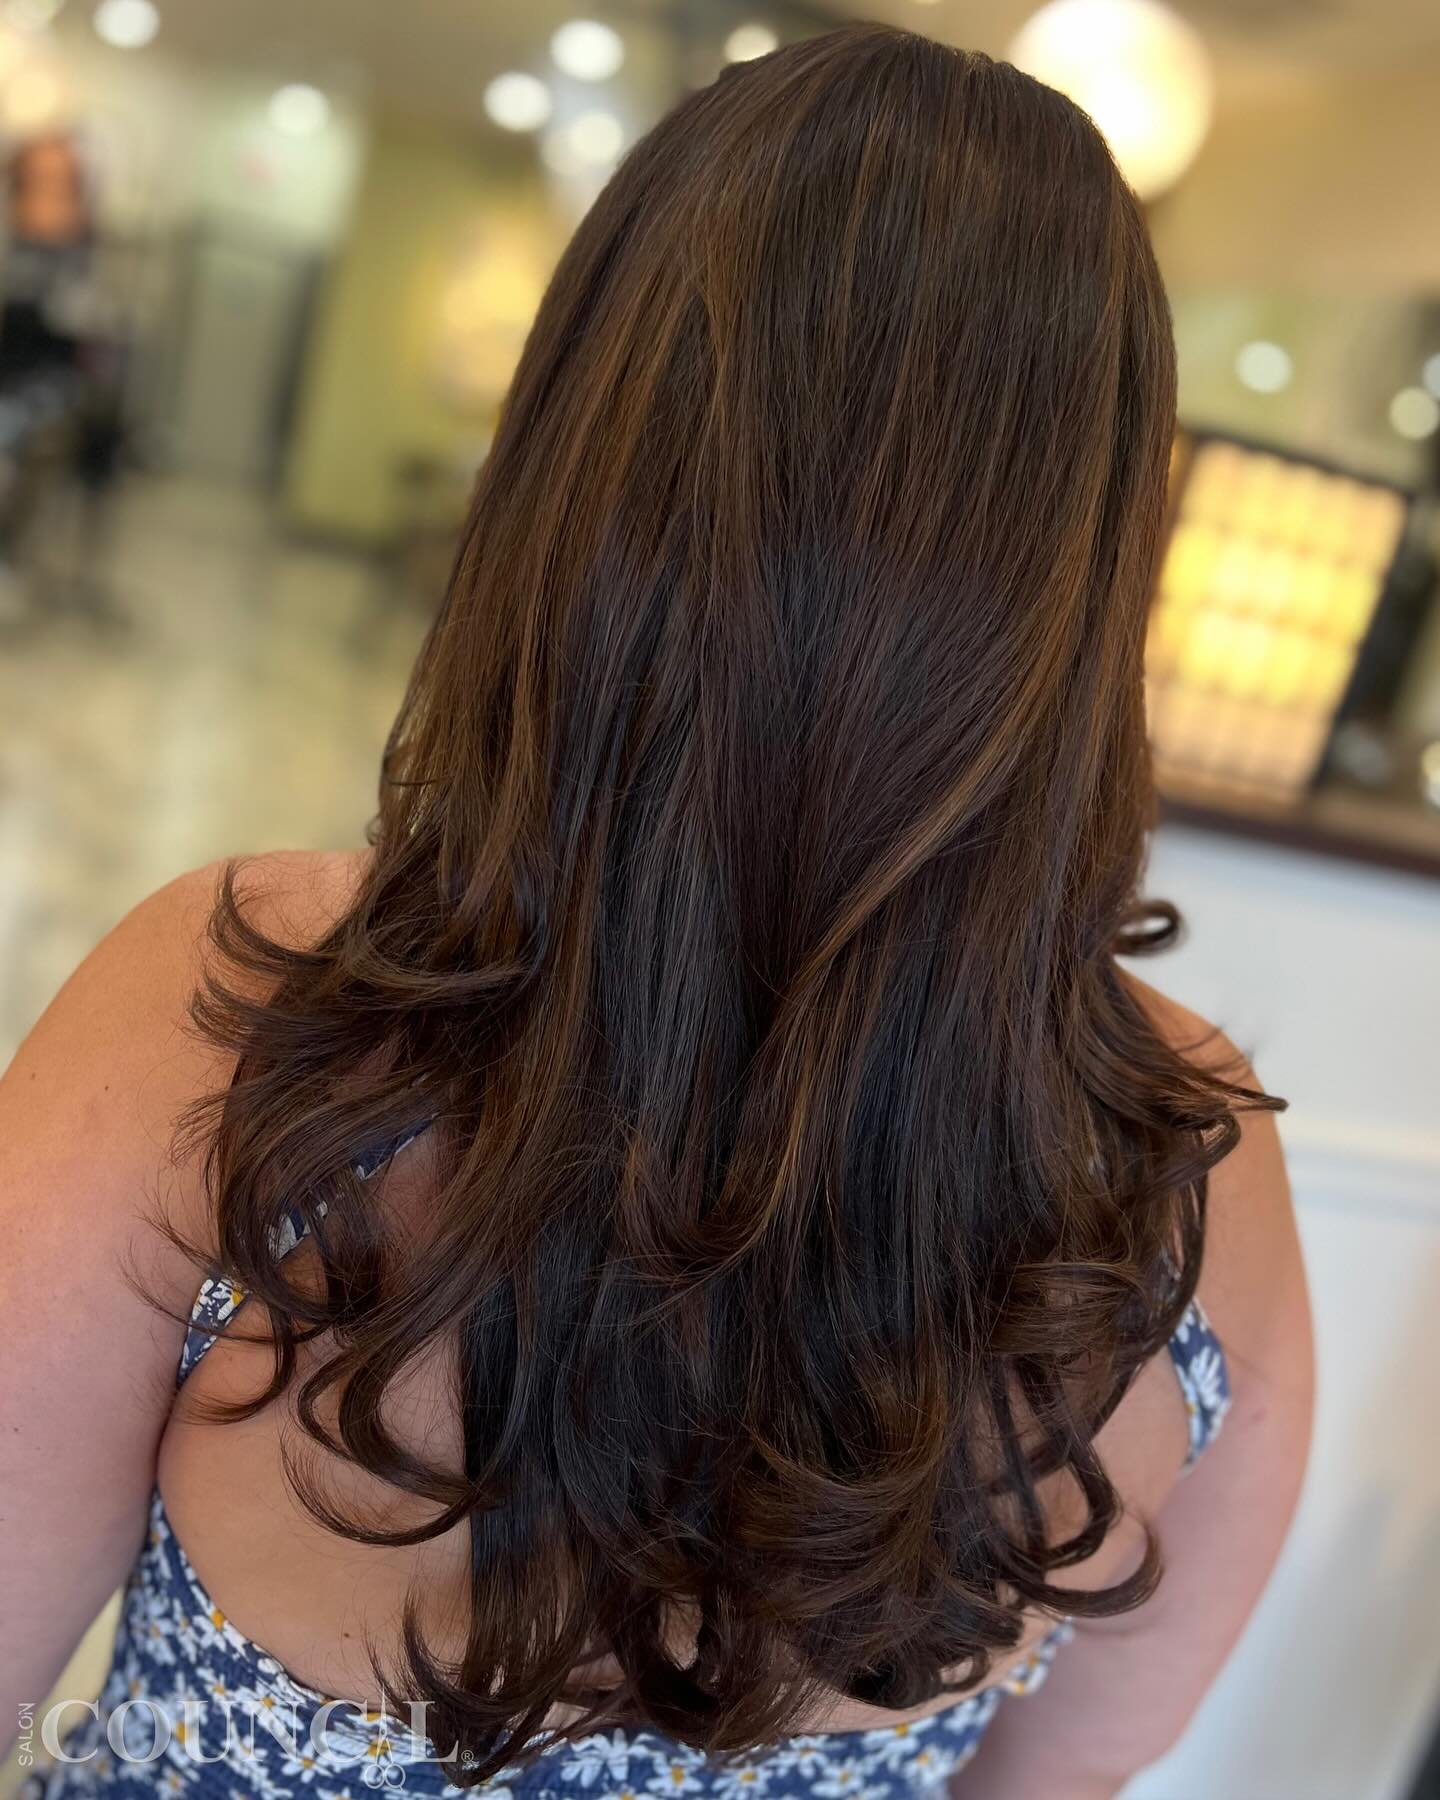 🎉#partialfoil 
Glam up with dimensional partial highlights, expertly toned and styled with a fabulous blowout! 
Ready to sparkle with every turn. #HighlightHeaven #StyleRefresh&rdquo;

HIGHLIGHTS &bull; TONER &bull; BLOWDRY STYLE 

Hair by GENESIS @